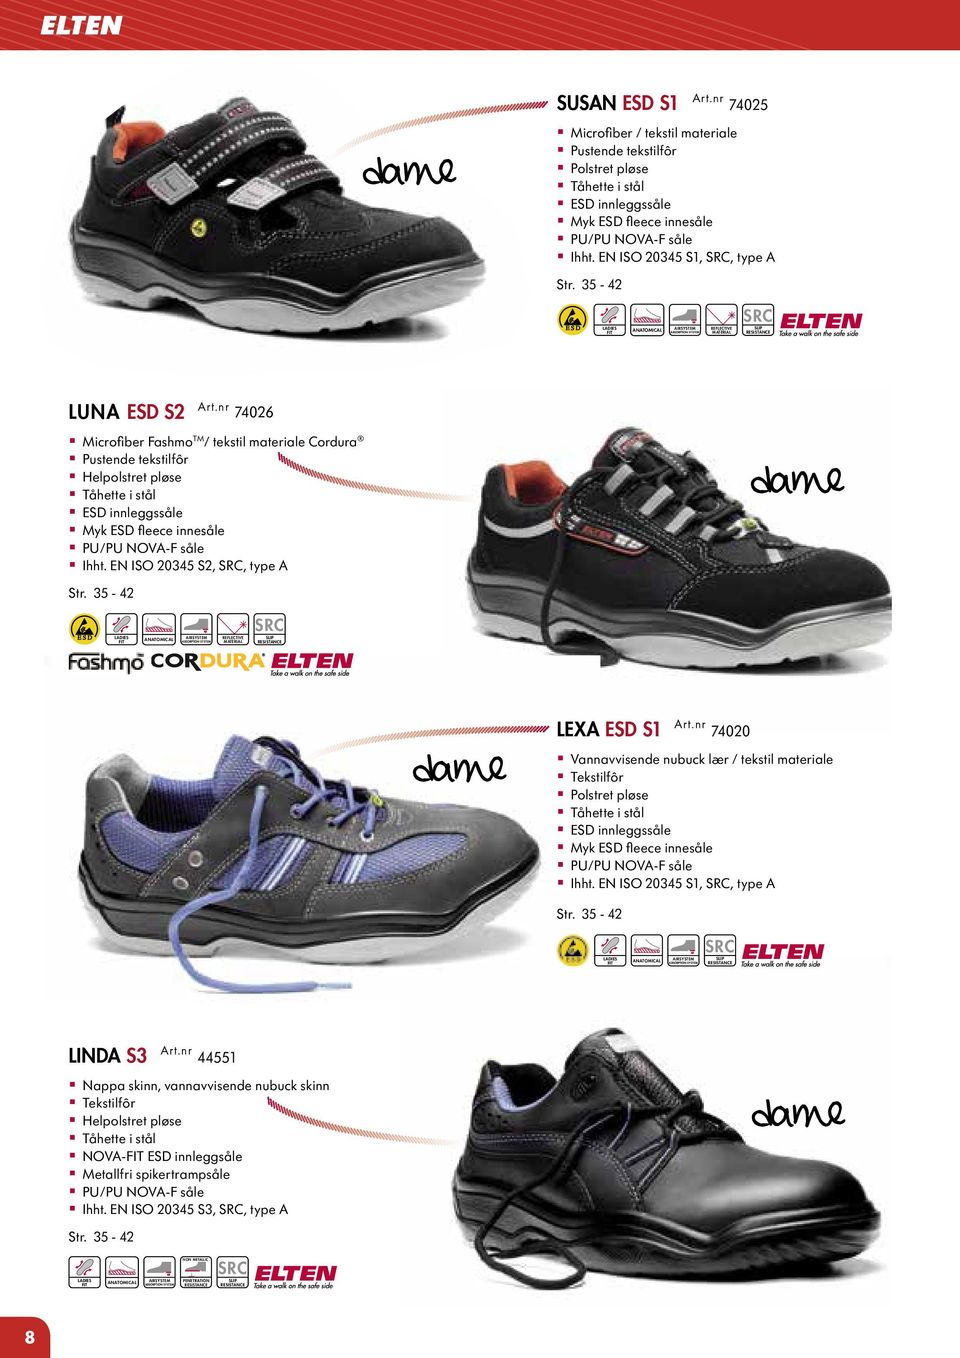 EN ISO 20345 S2,, type A dame Str. 35-42 LADIES FIT AIRSYSTEM ABSORPTION SYSTEM dame LEXA ESD S1 Art.